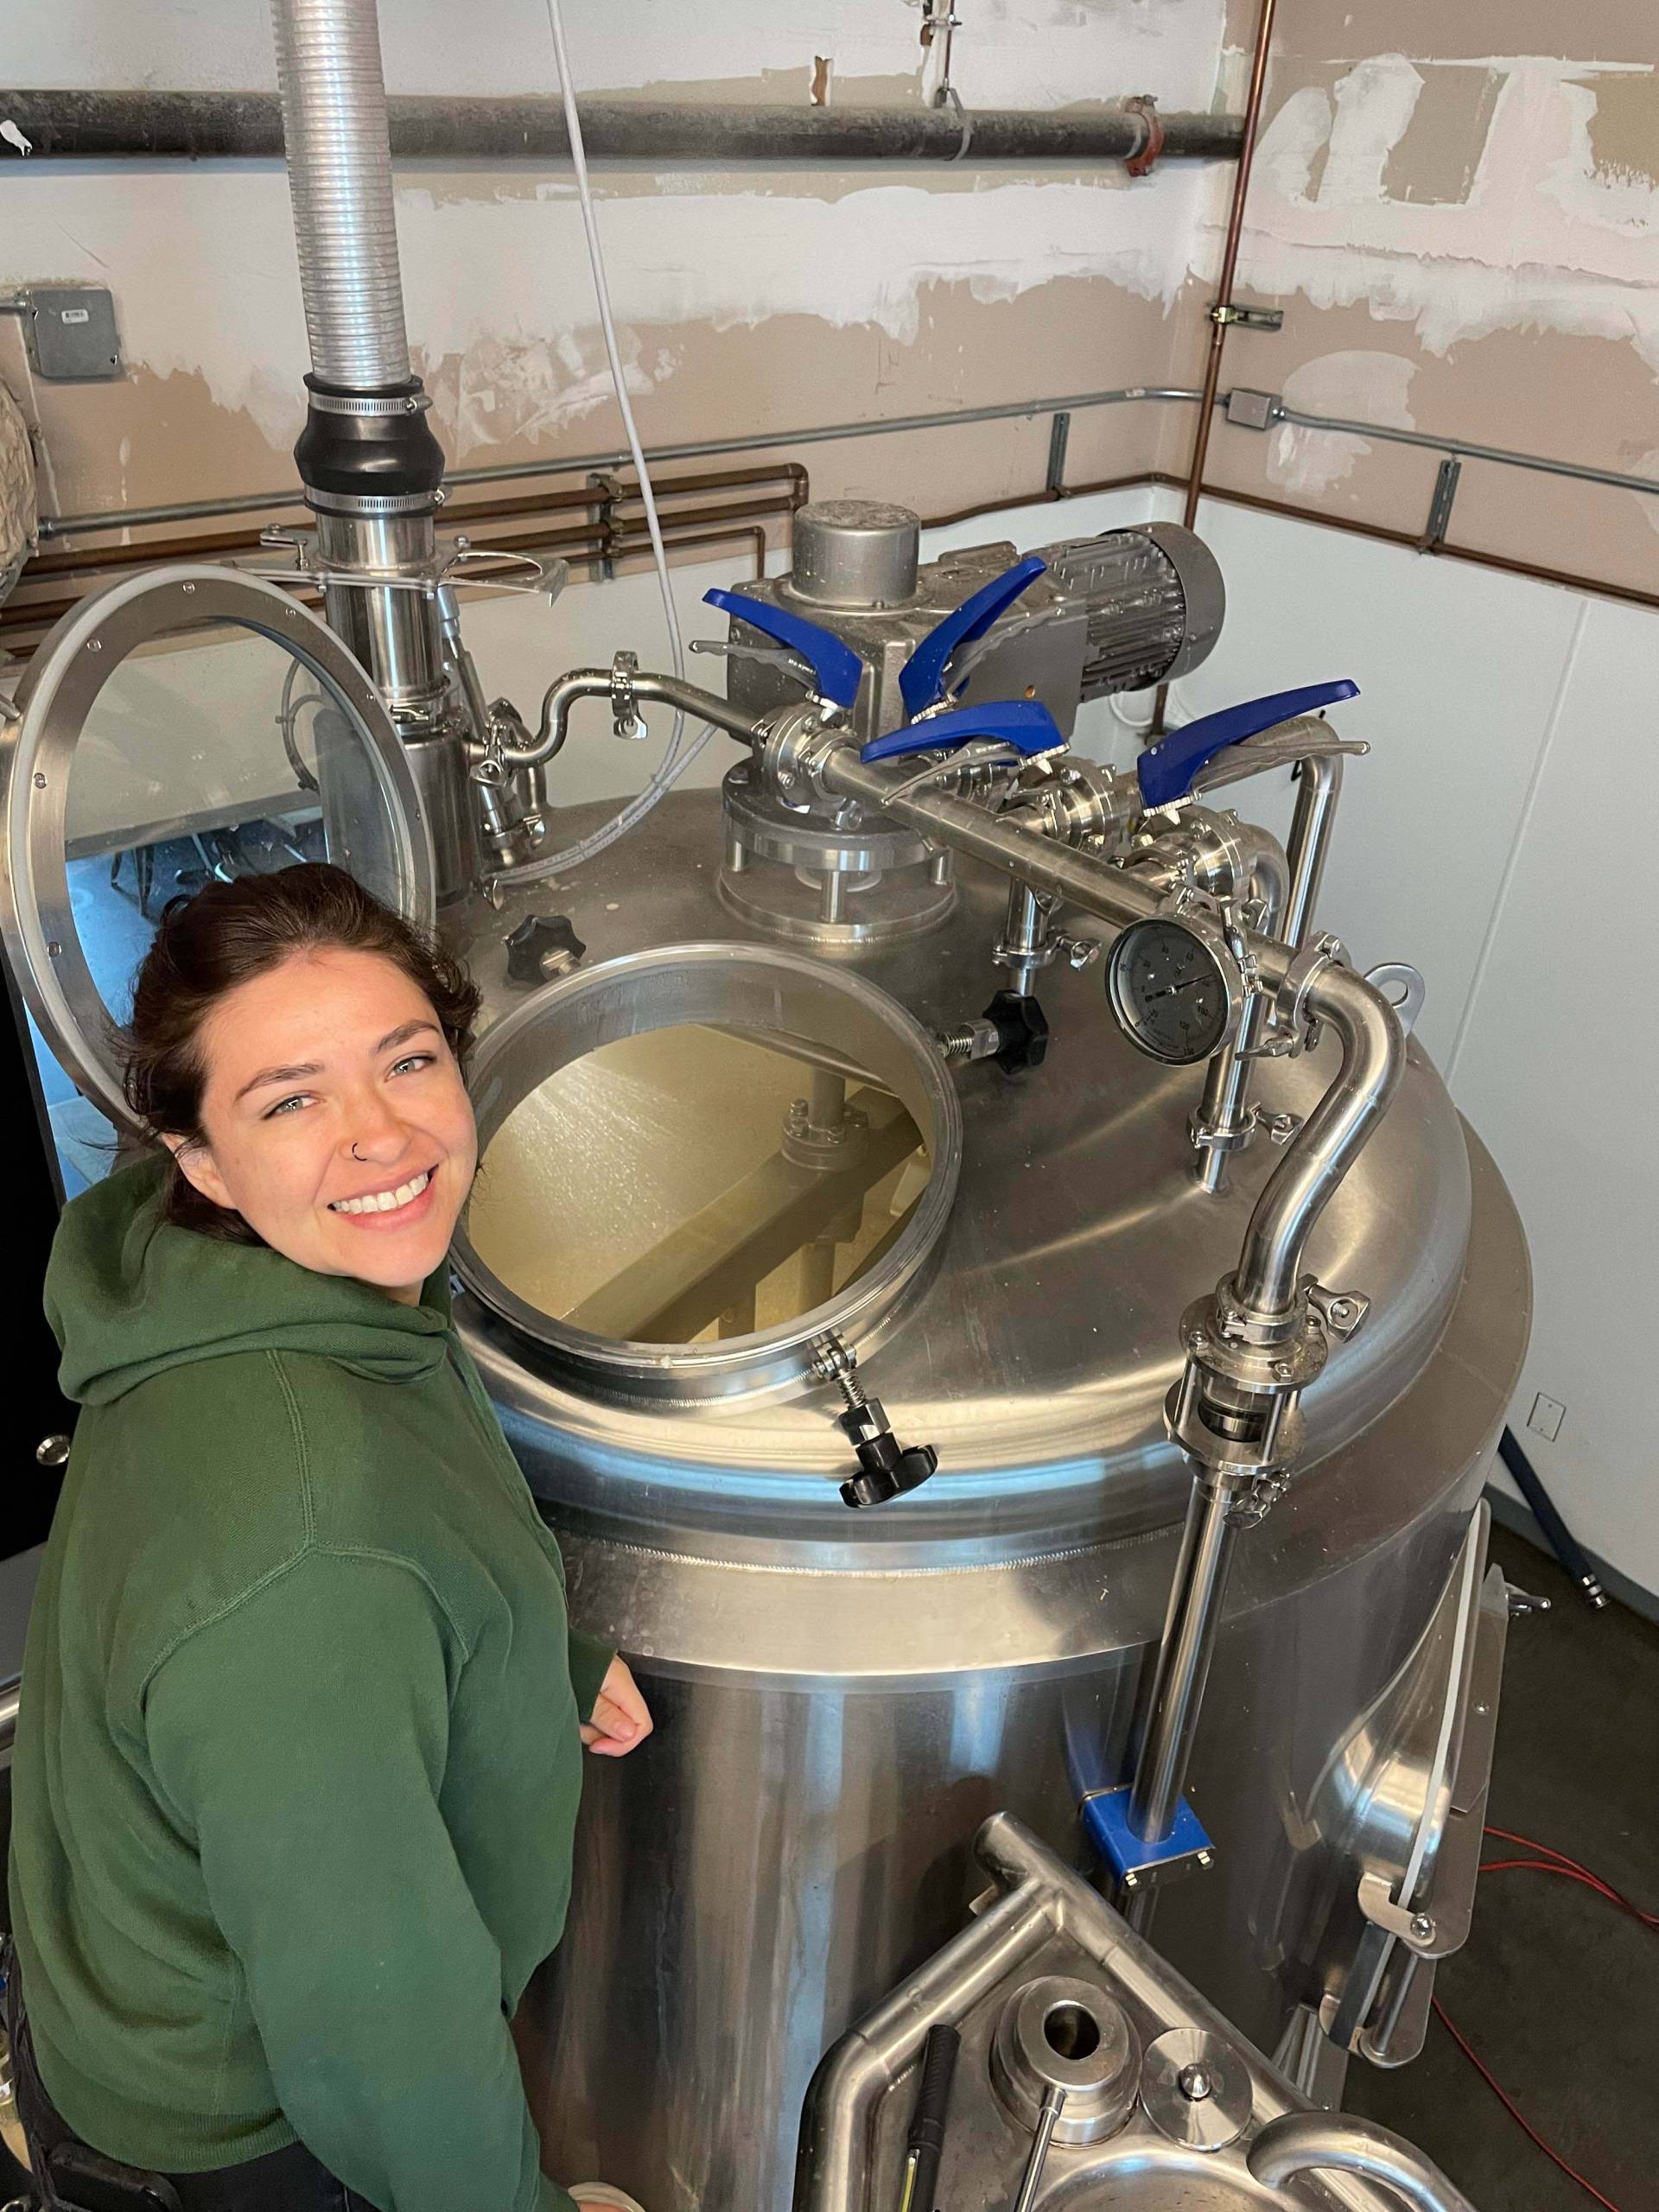 Woman in green sweatshirt stands in front of a large metal kettle for brewing beer.